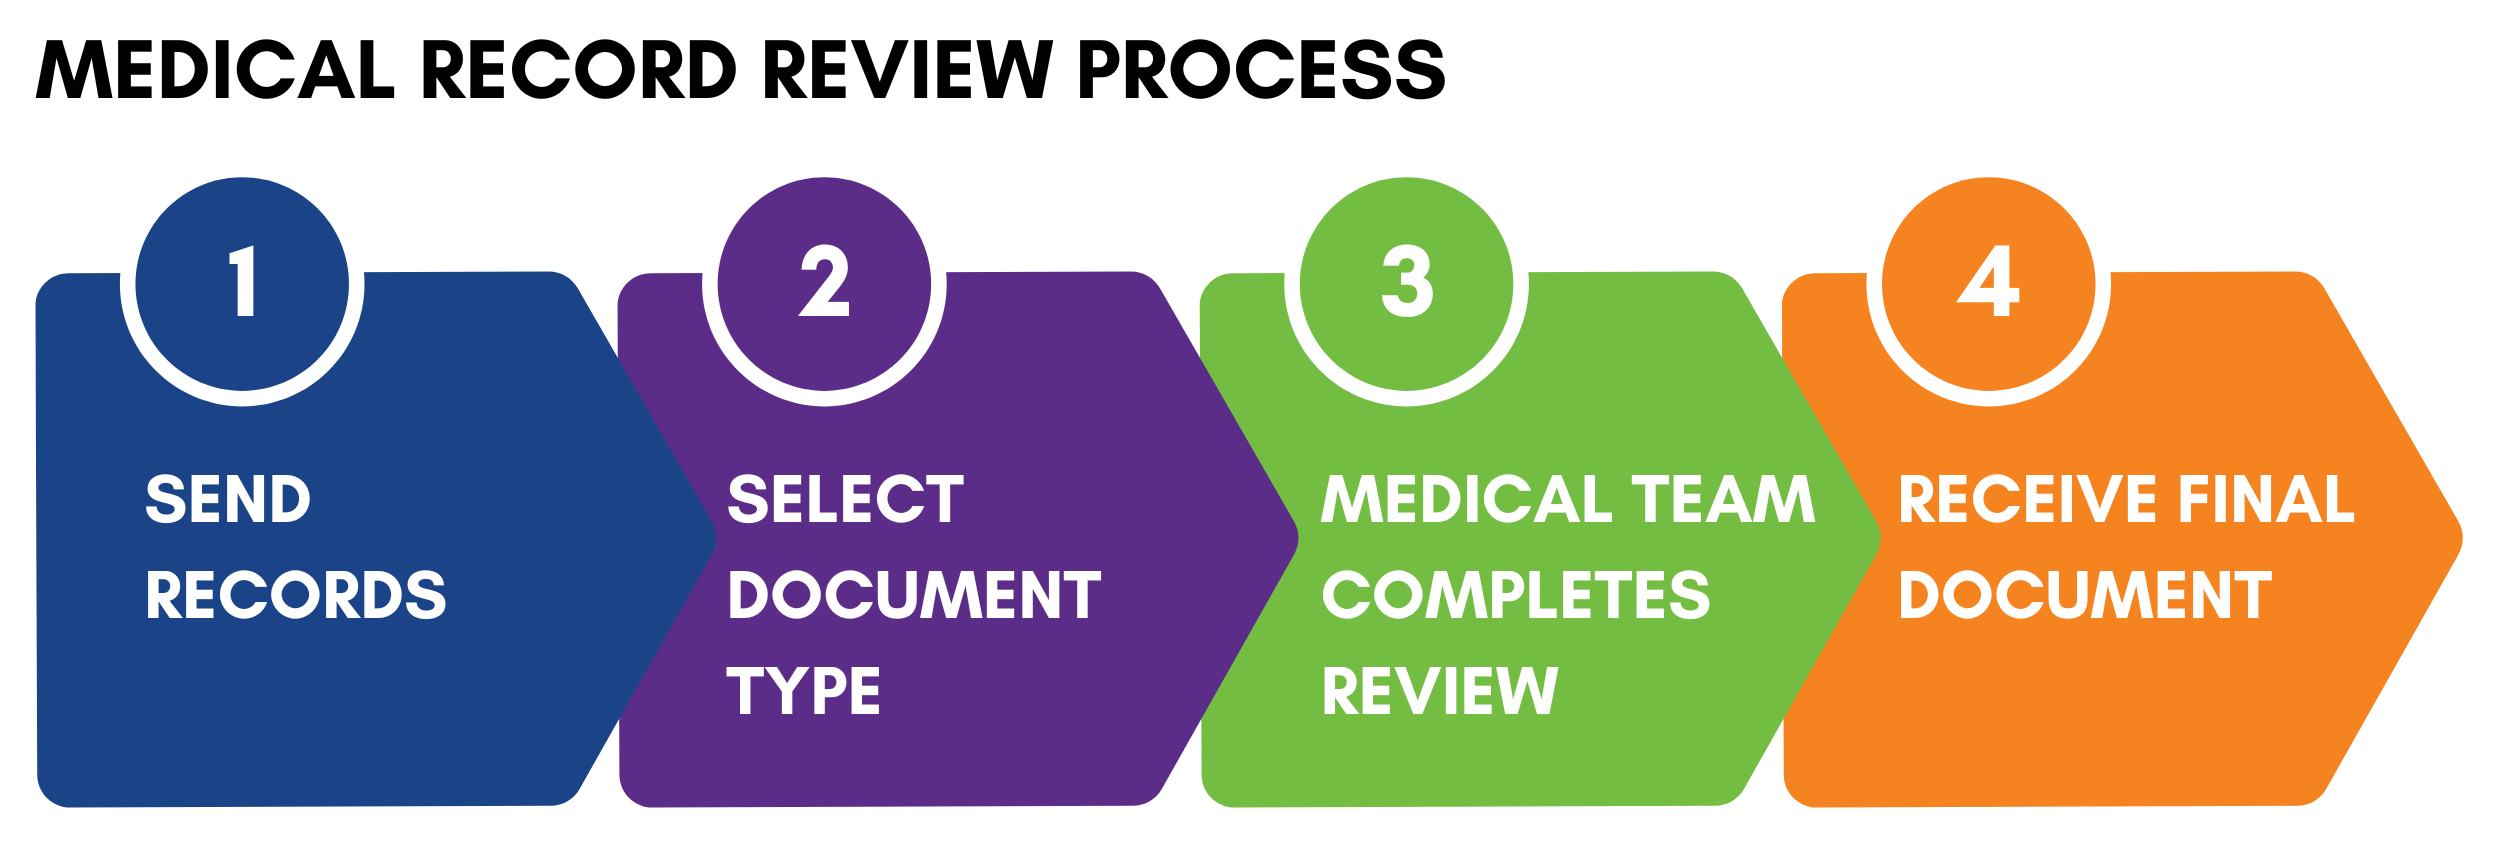 Medical Record Review Process